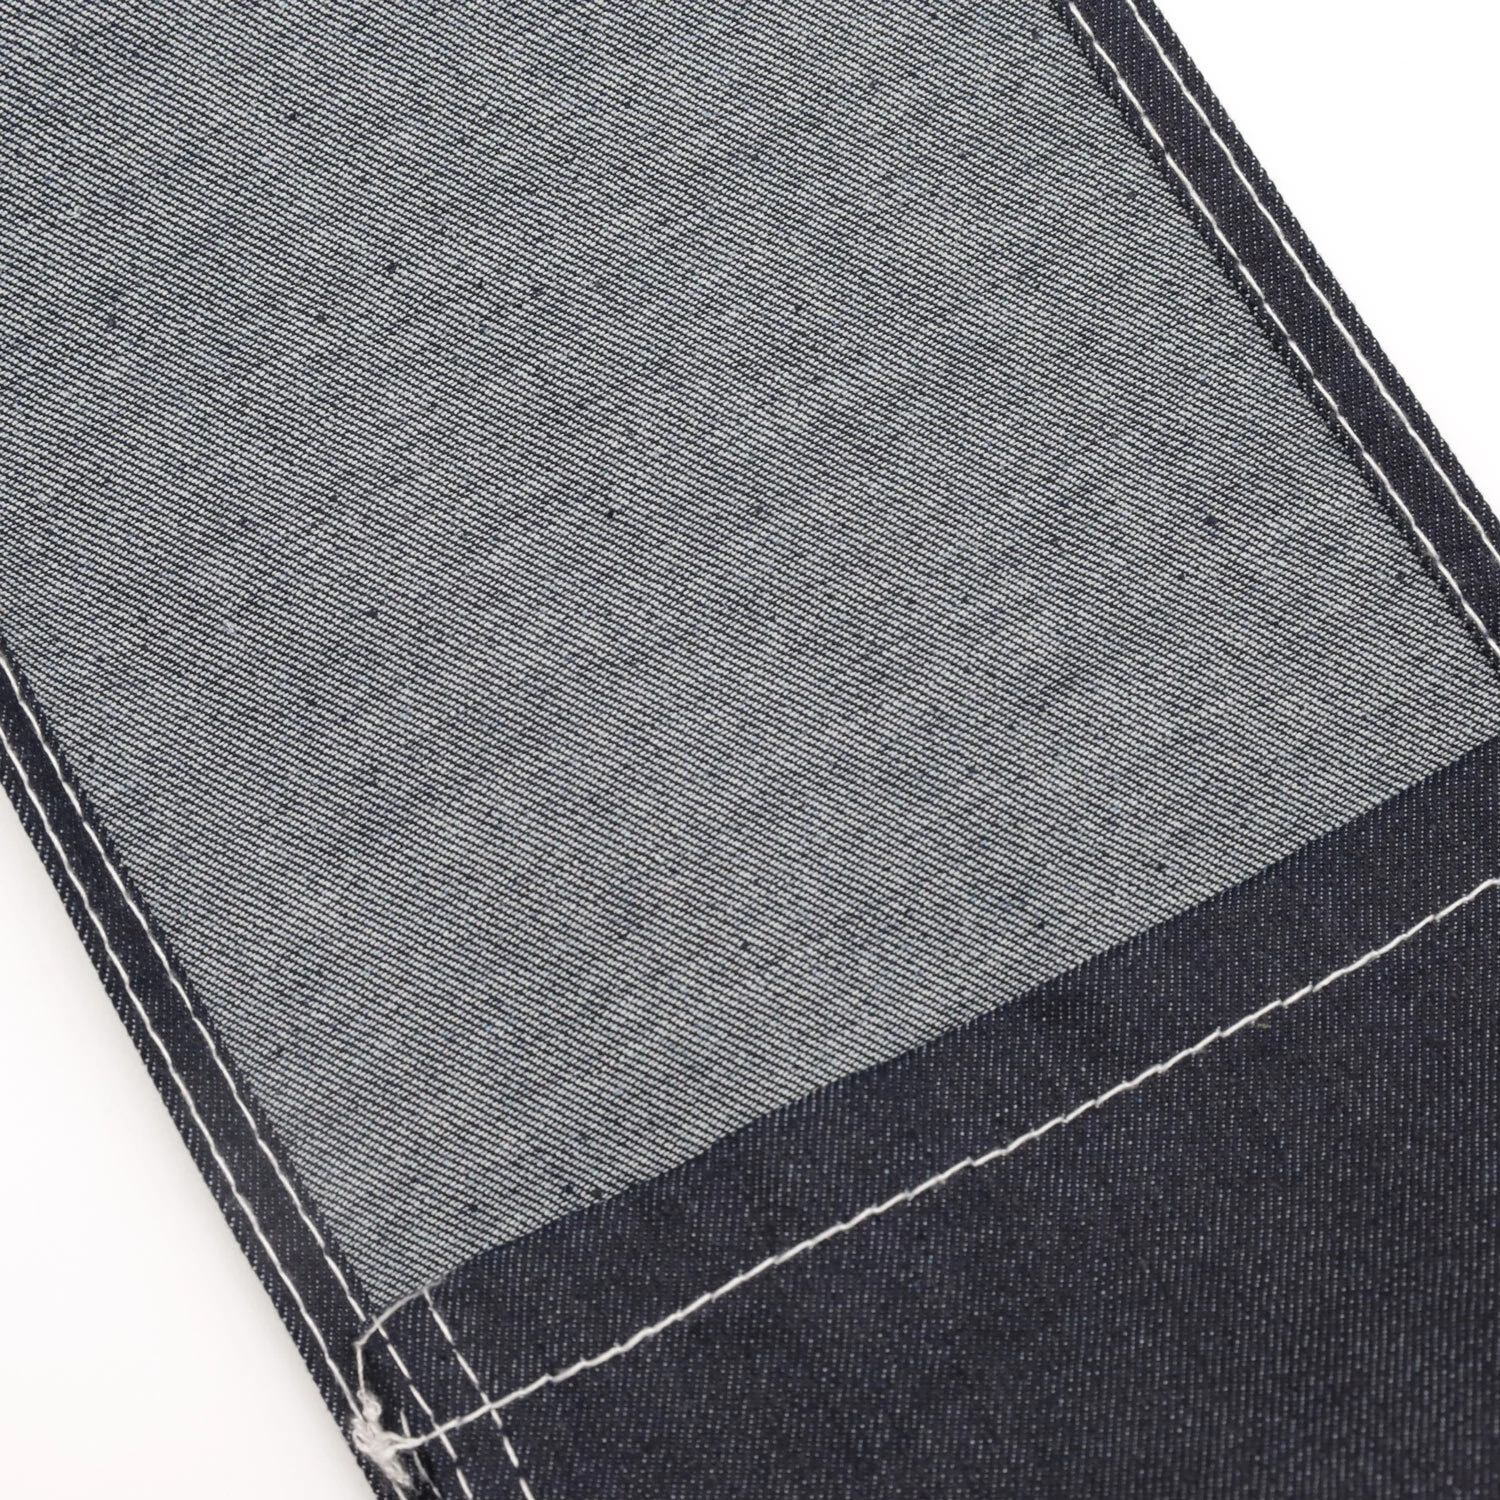 205A-3 73%Cotton  24.5%Poly  2.5%Spandex nice touching stretchable indigo twill jeans fabric 6